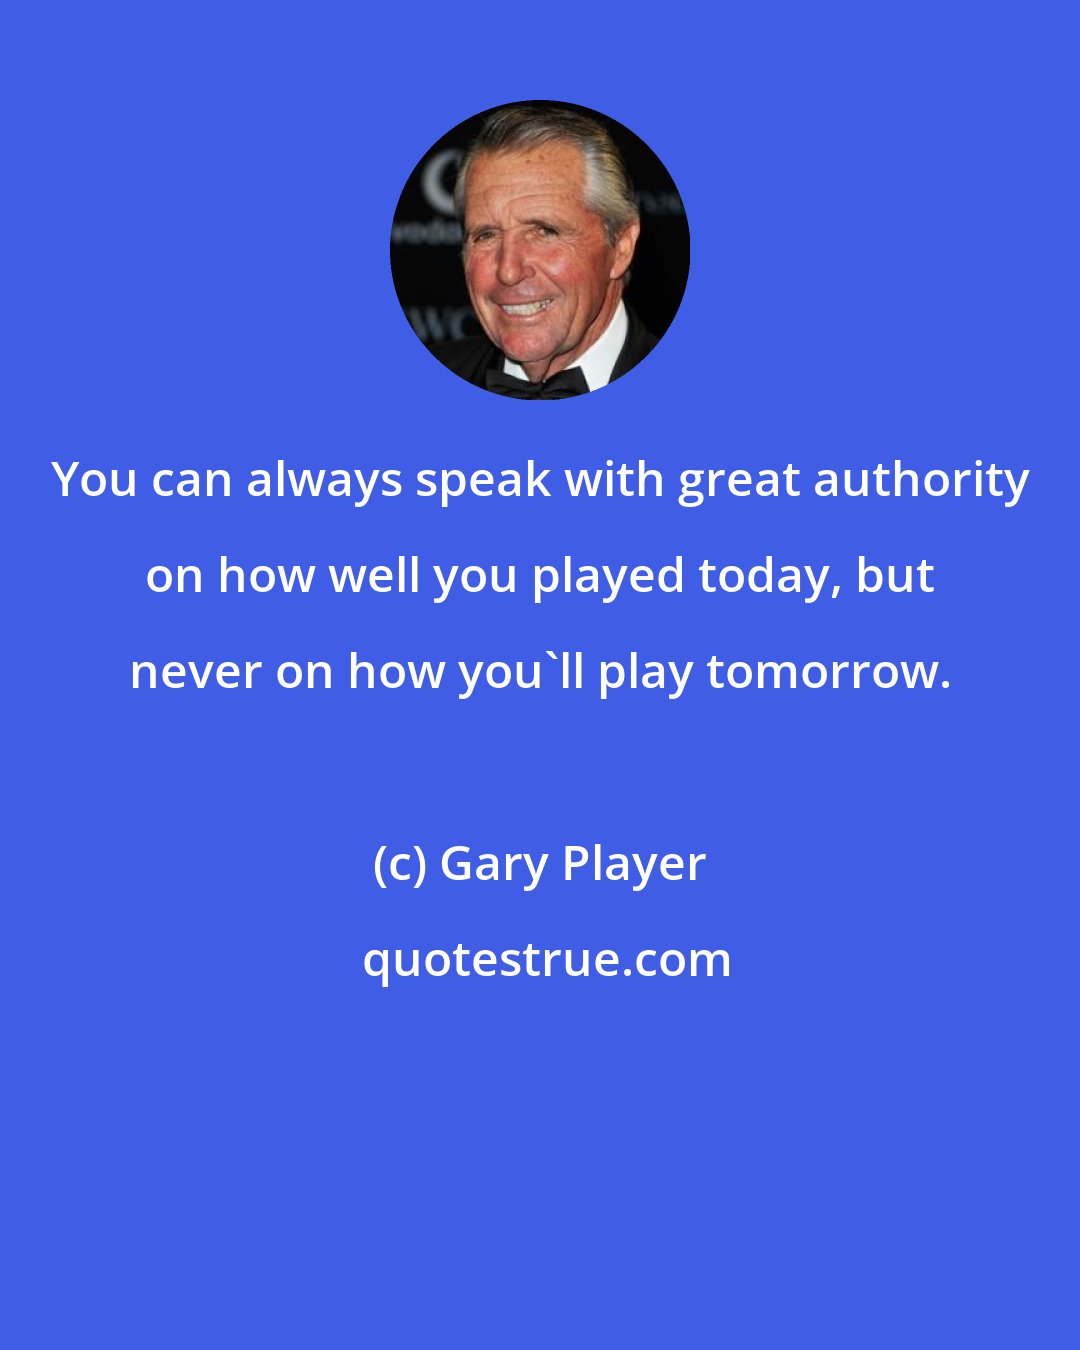 Gary Player: You can always speak with great authority on how well you played today, but never on how you'll play tomorrow.